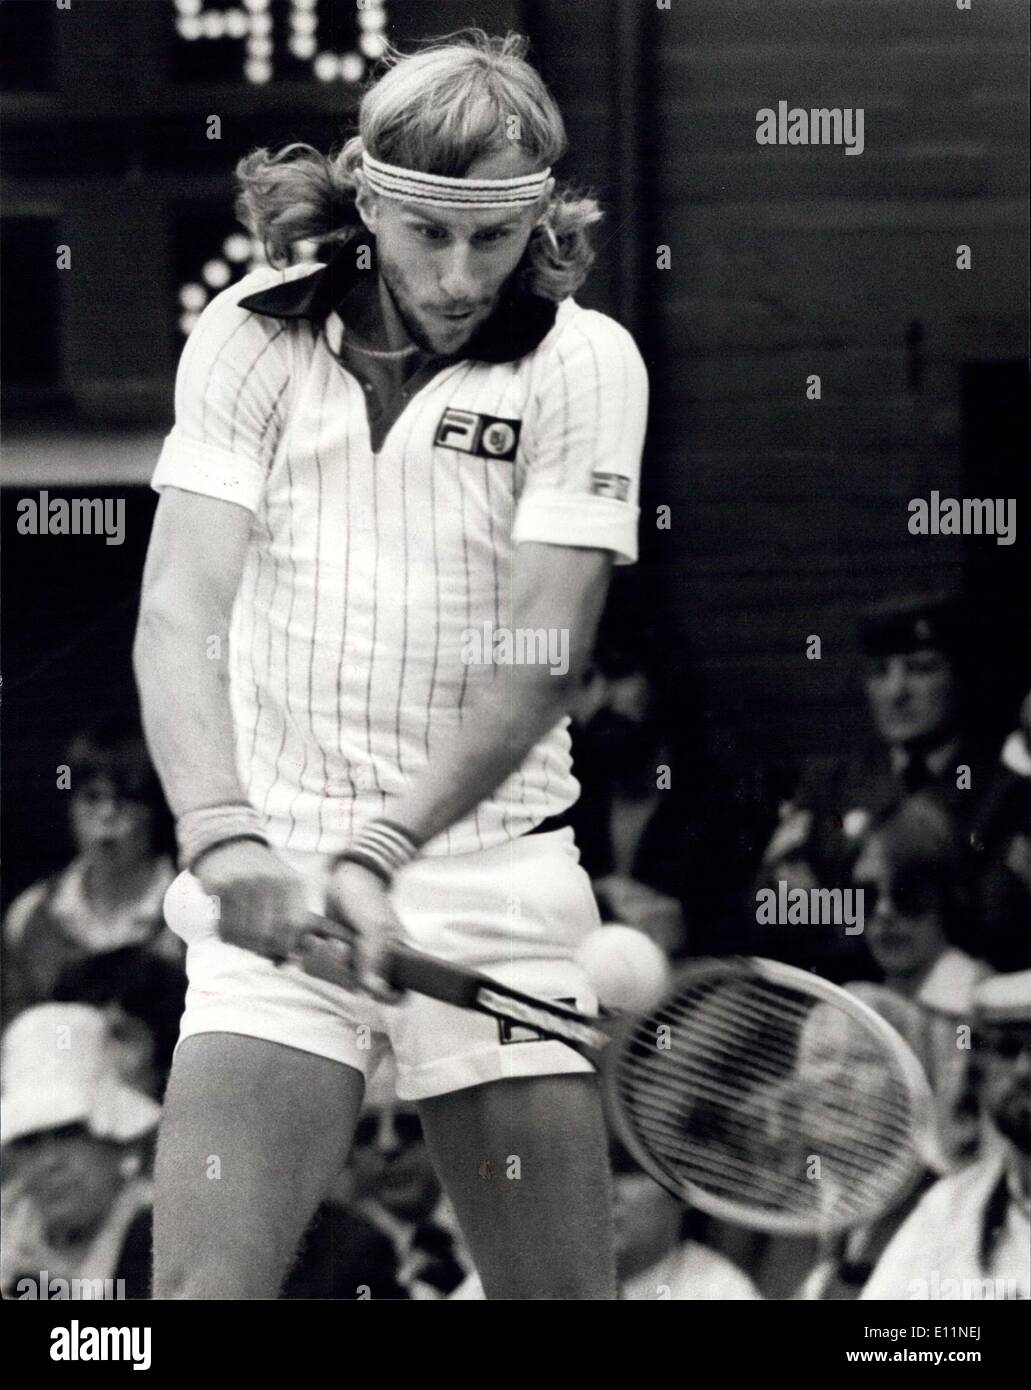 Jul. 07, 1979 - BJORN BORG WINS HIS FOURTH SECCESSIVE WIMBLEDON TITLE  BEATING ROSCOE TANNER IN FIVE SETS. Today of the Centre Court at Wimbledon BJORN  BORG of Sweden won the Men's